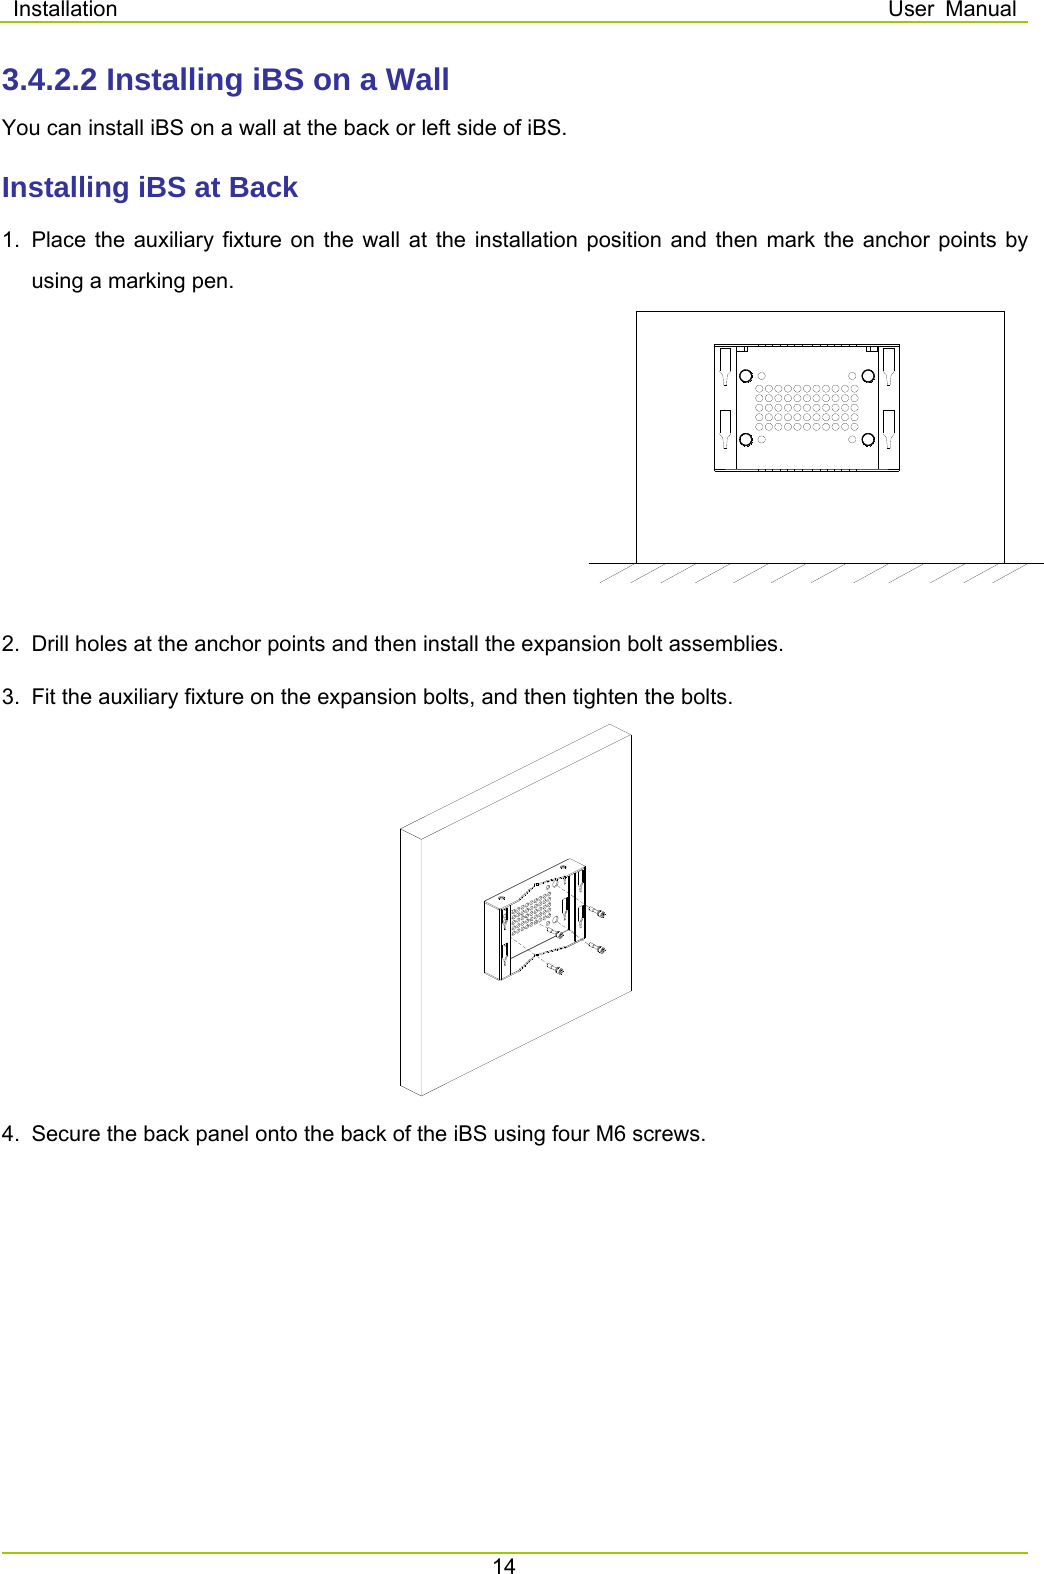 Installation  User Manual 14  3.4.2.2 Installing iBS on a Wall You can install iBS on a wall at the back or left side of iBS.   Installing iBS at Back 1.  Place the auxiliary fixture on the wall at the installation position and then mark the anchor points by using a marking pen.     2.  Drill holes at the anchor points and then install the expansion bolt assemblies.   3.  Fit the auxiliary fixture on the expansion bolts, and then tighten the bolts.      4.  Secure the back panel onto the back of the iBS using four M6 screws. 